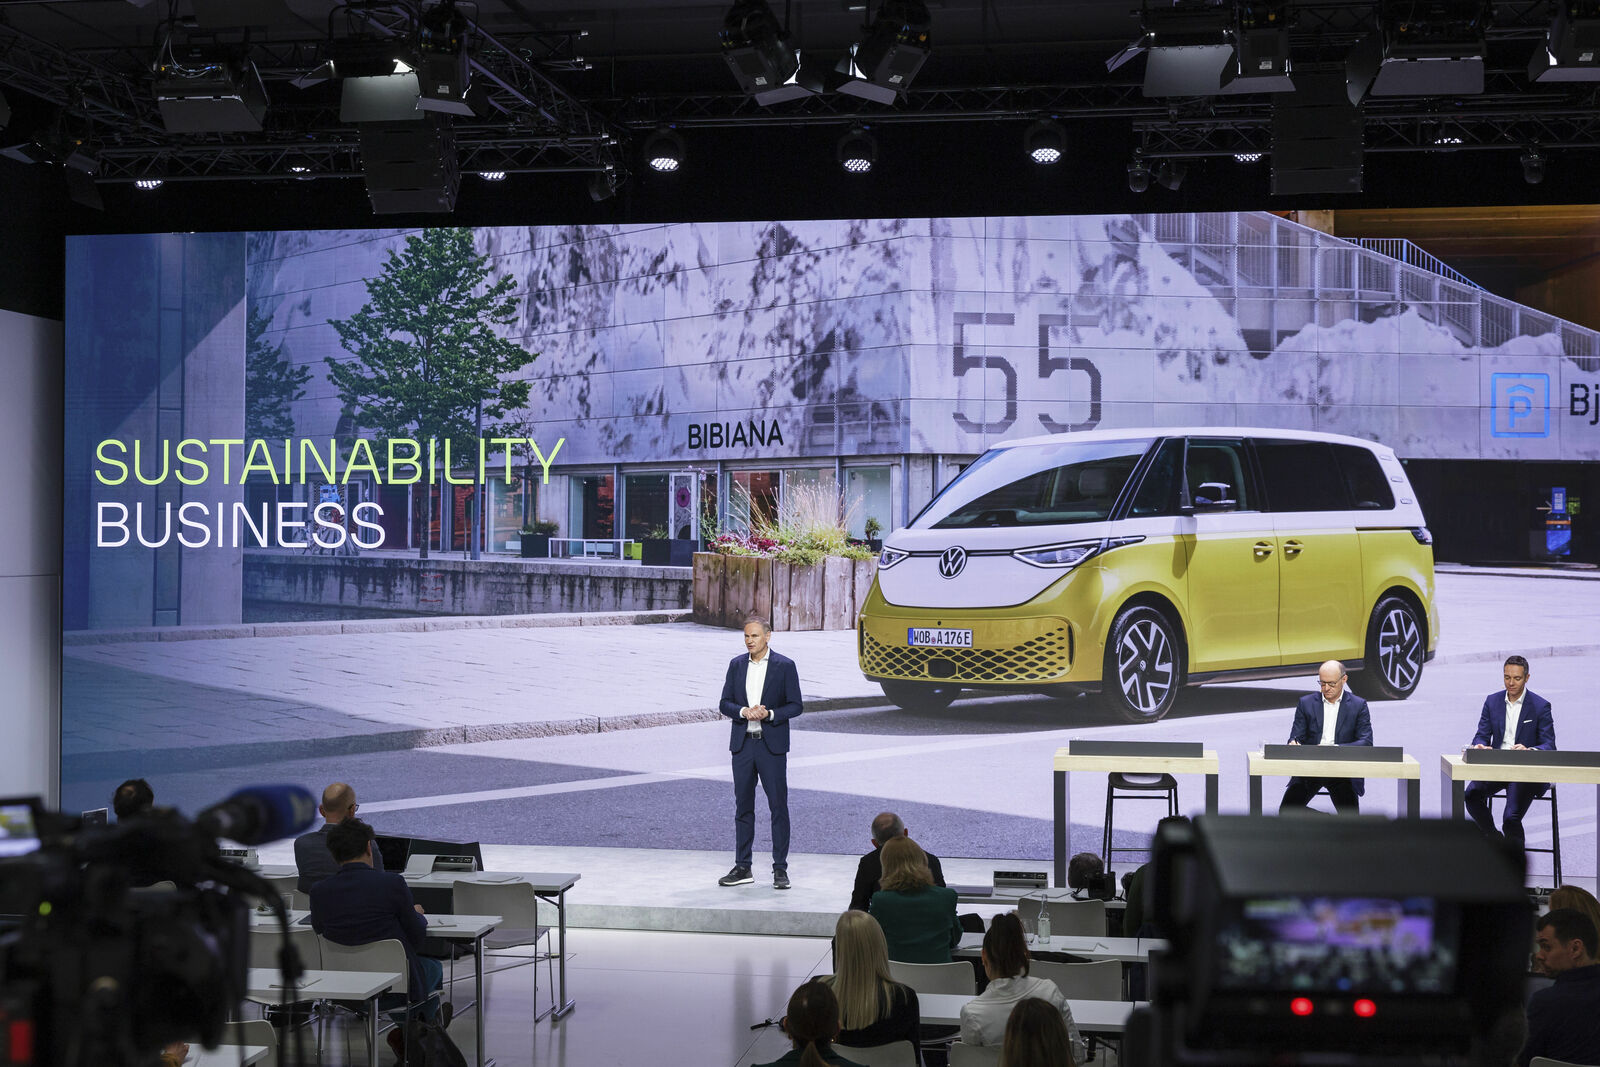 A man presents on stage about sustainability in business featuring an image of a yellow, electrical VW bus.